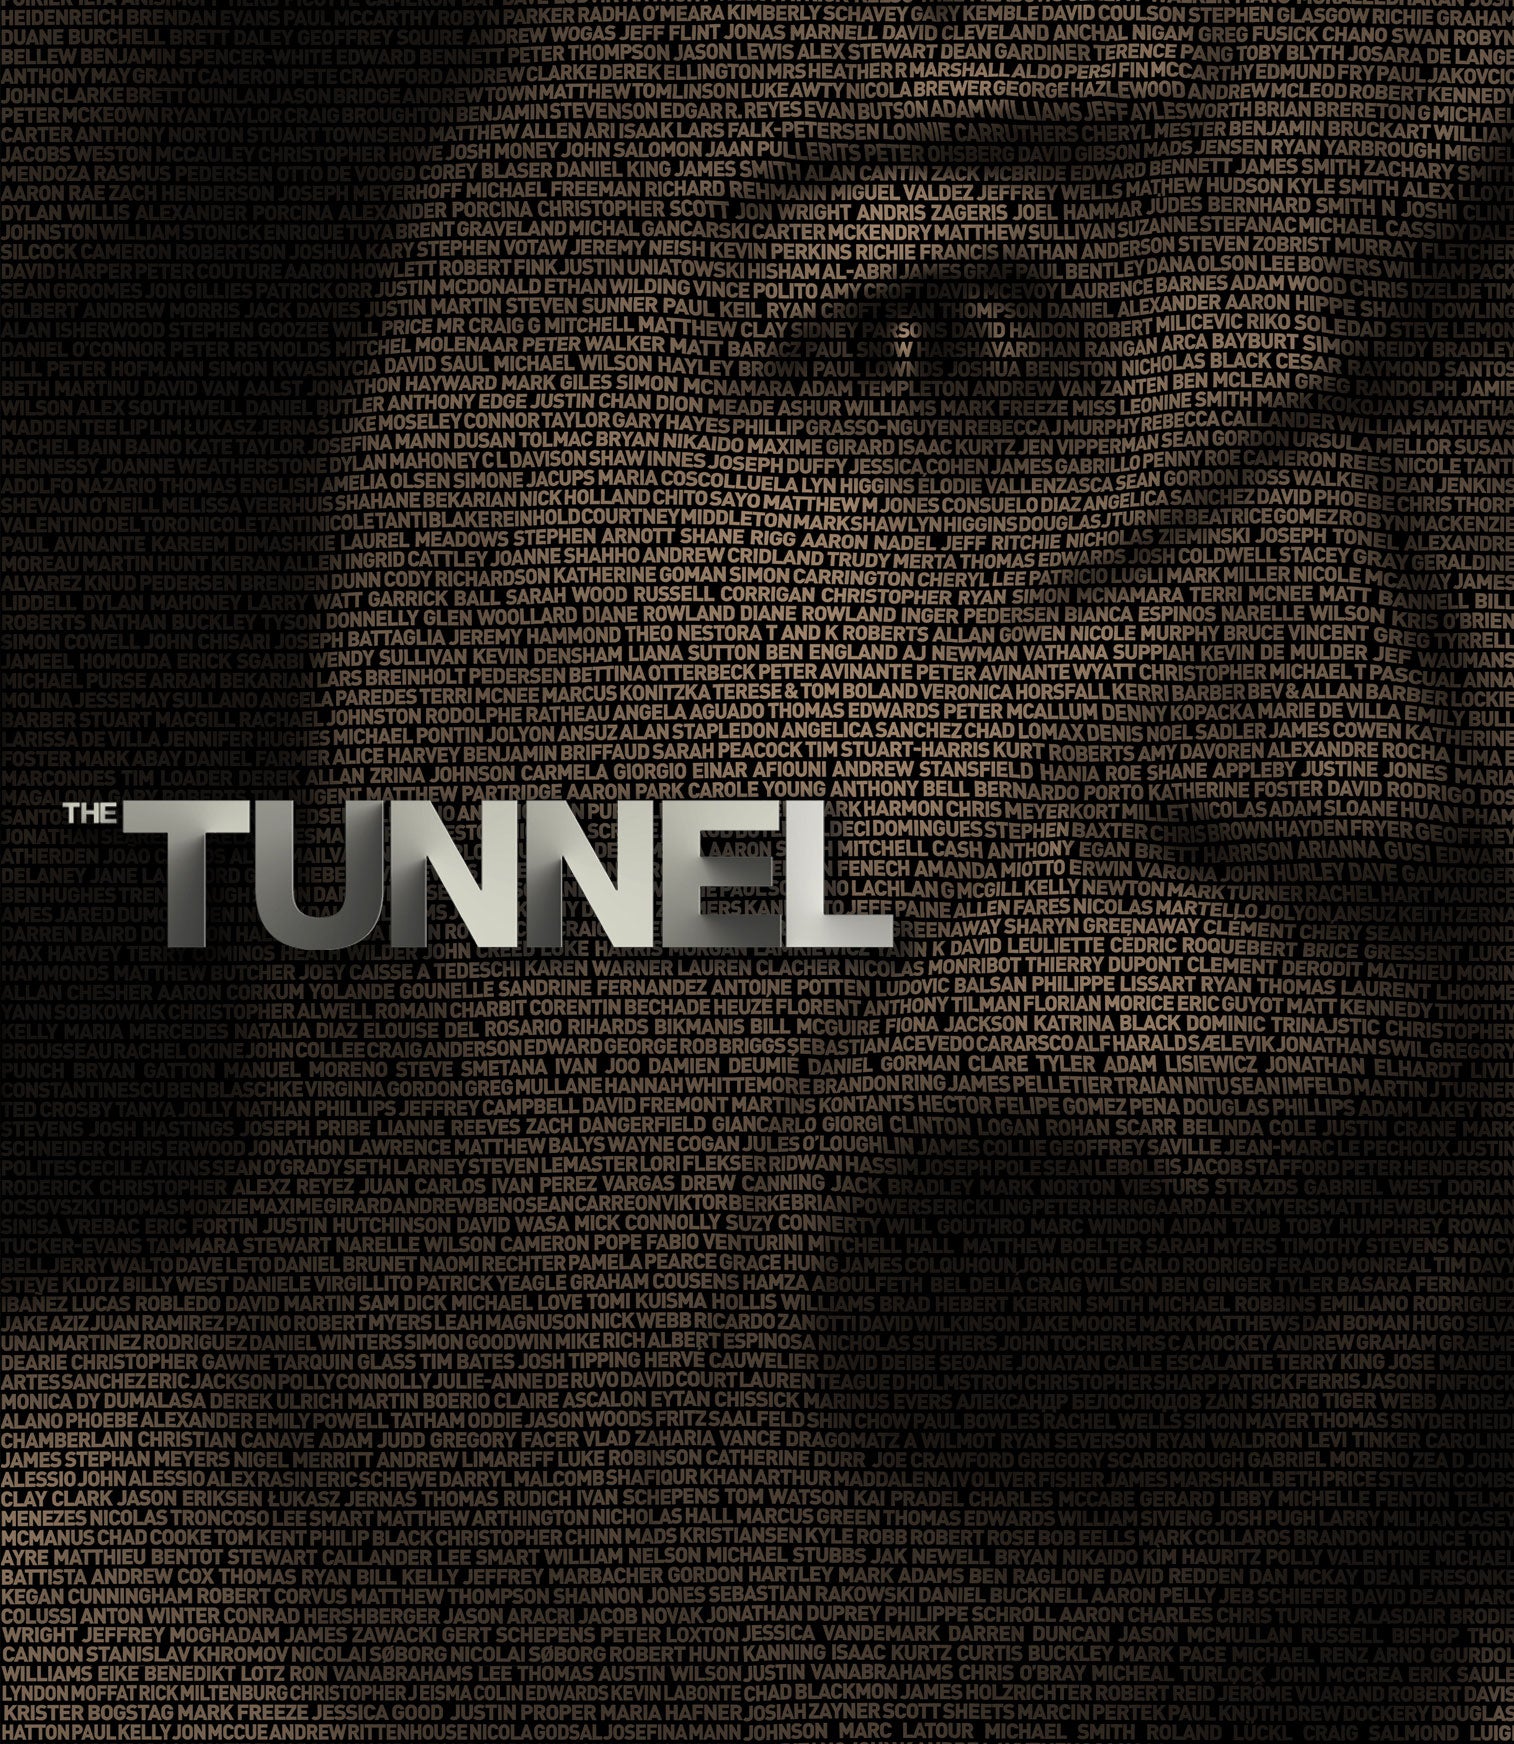 THE TUNNEL BLU-RAY [PRE-ORDER]